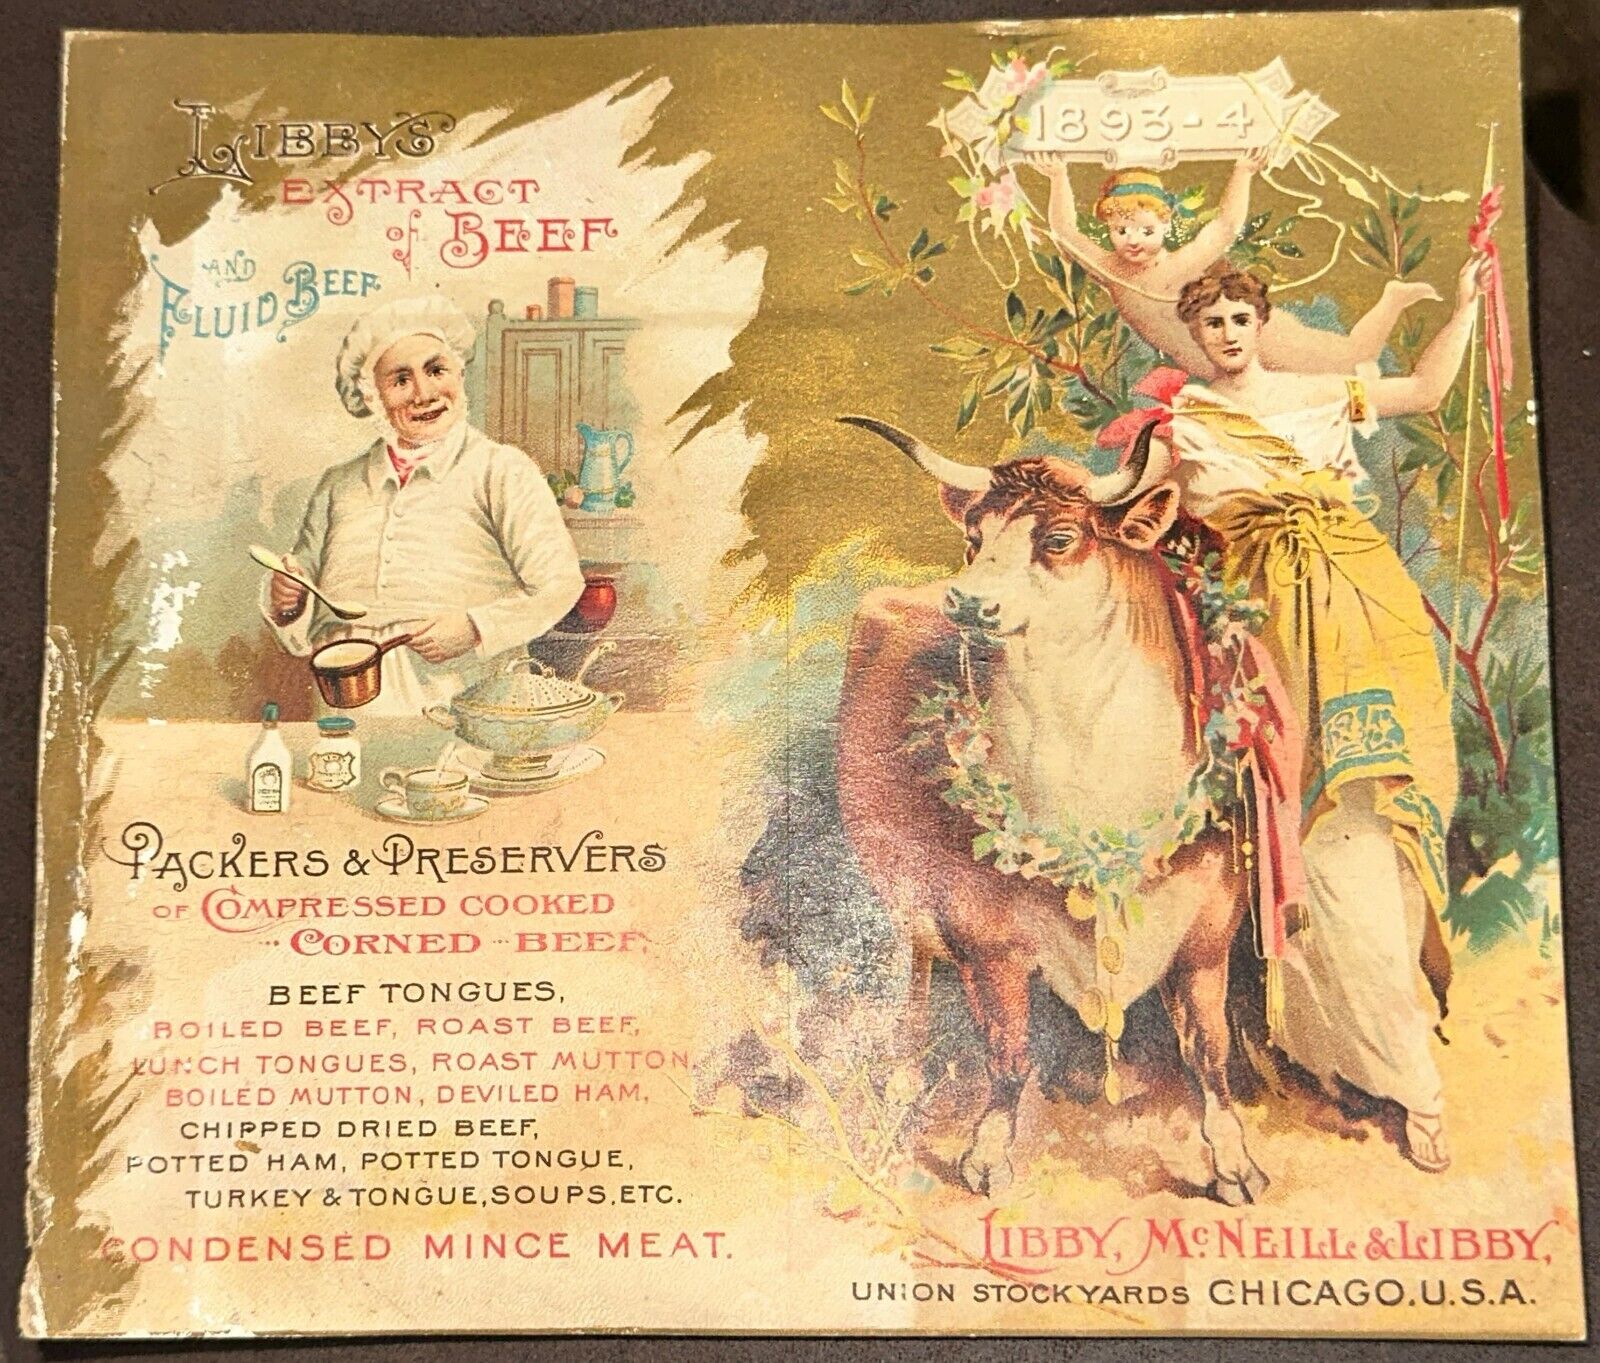 1893-94 Libby McNeill Extract Beef Calendar Graphic Victorian Trade Card (VTC)